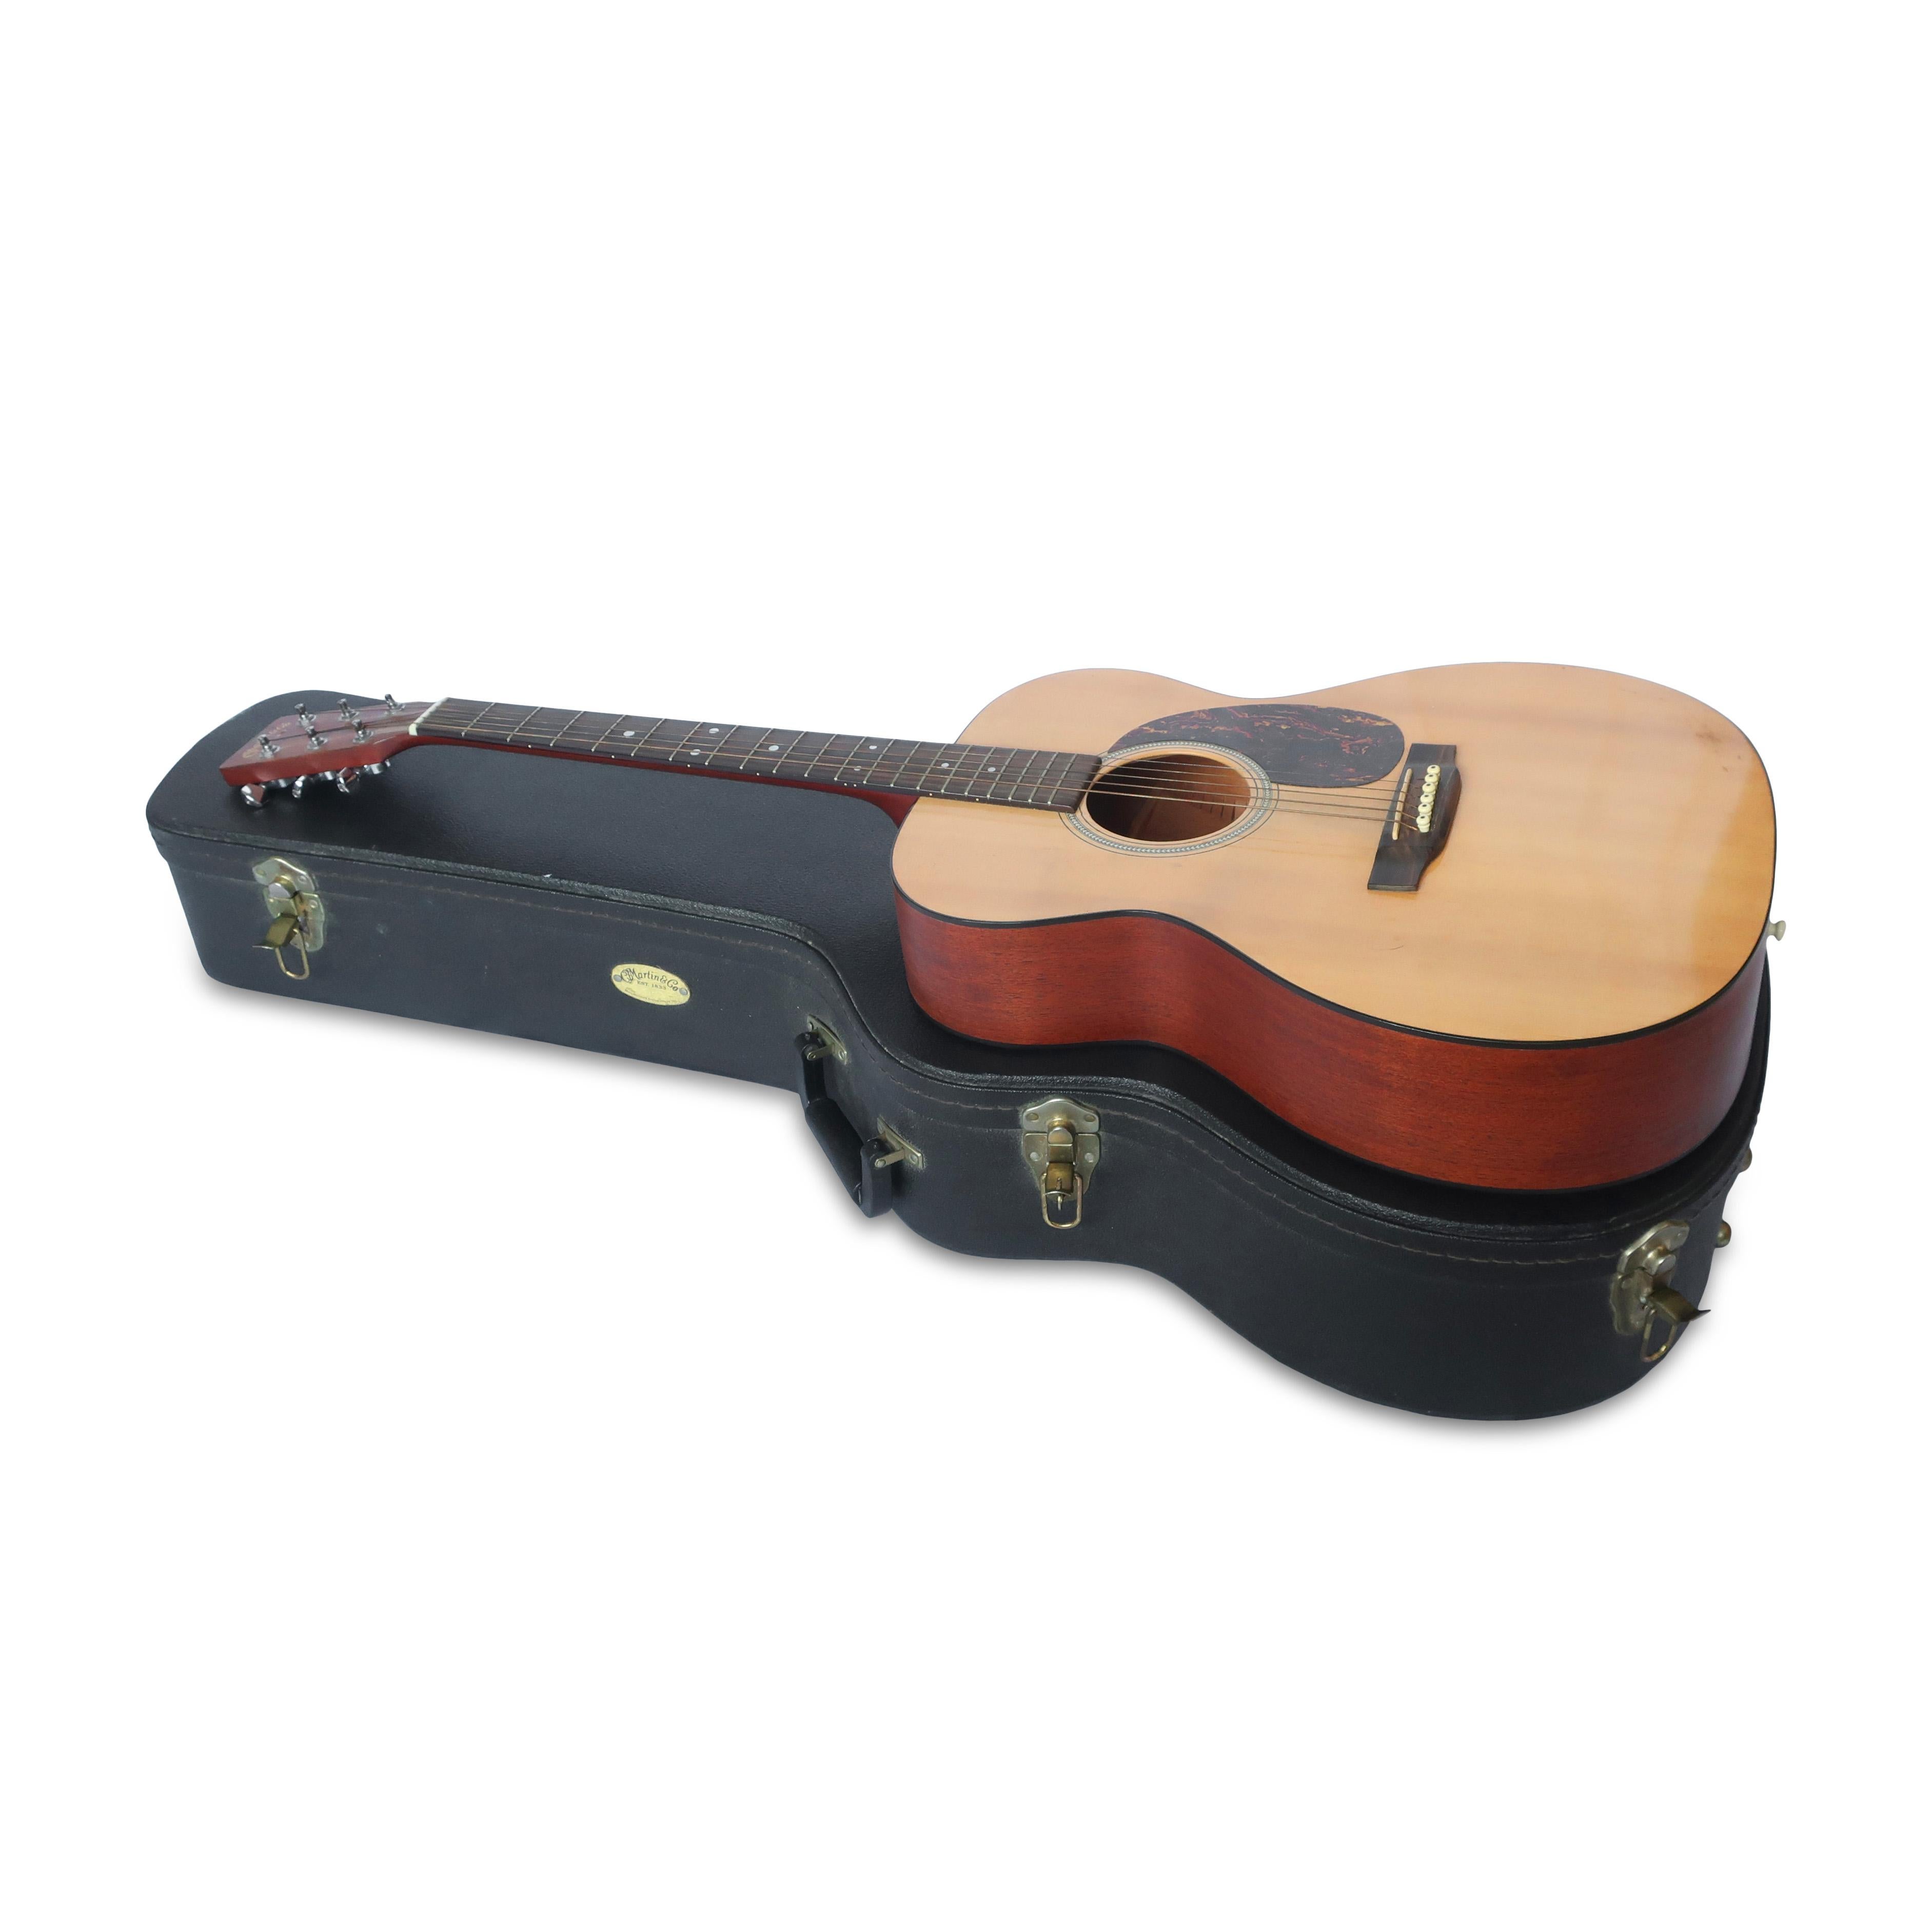 Looking for a great-sounding, great-playing guitar that combines modern guitar specifications with the famous Martin quality and sound?  Then you will love the 000-16GT Acoustic Guitar. This guitar features a solid Sitka spruce top, solid mahogany